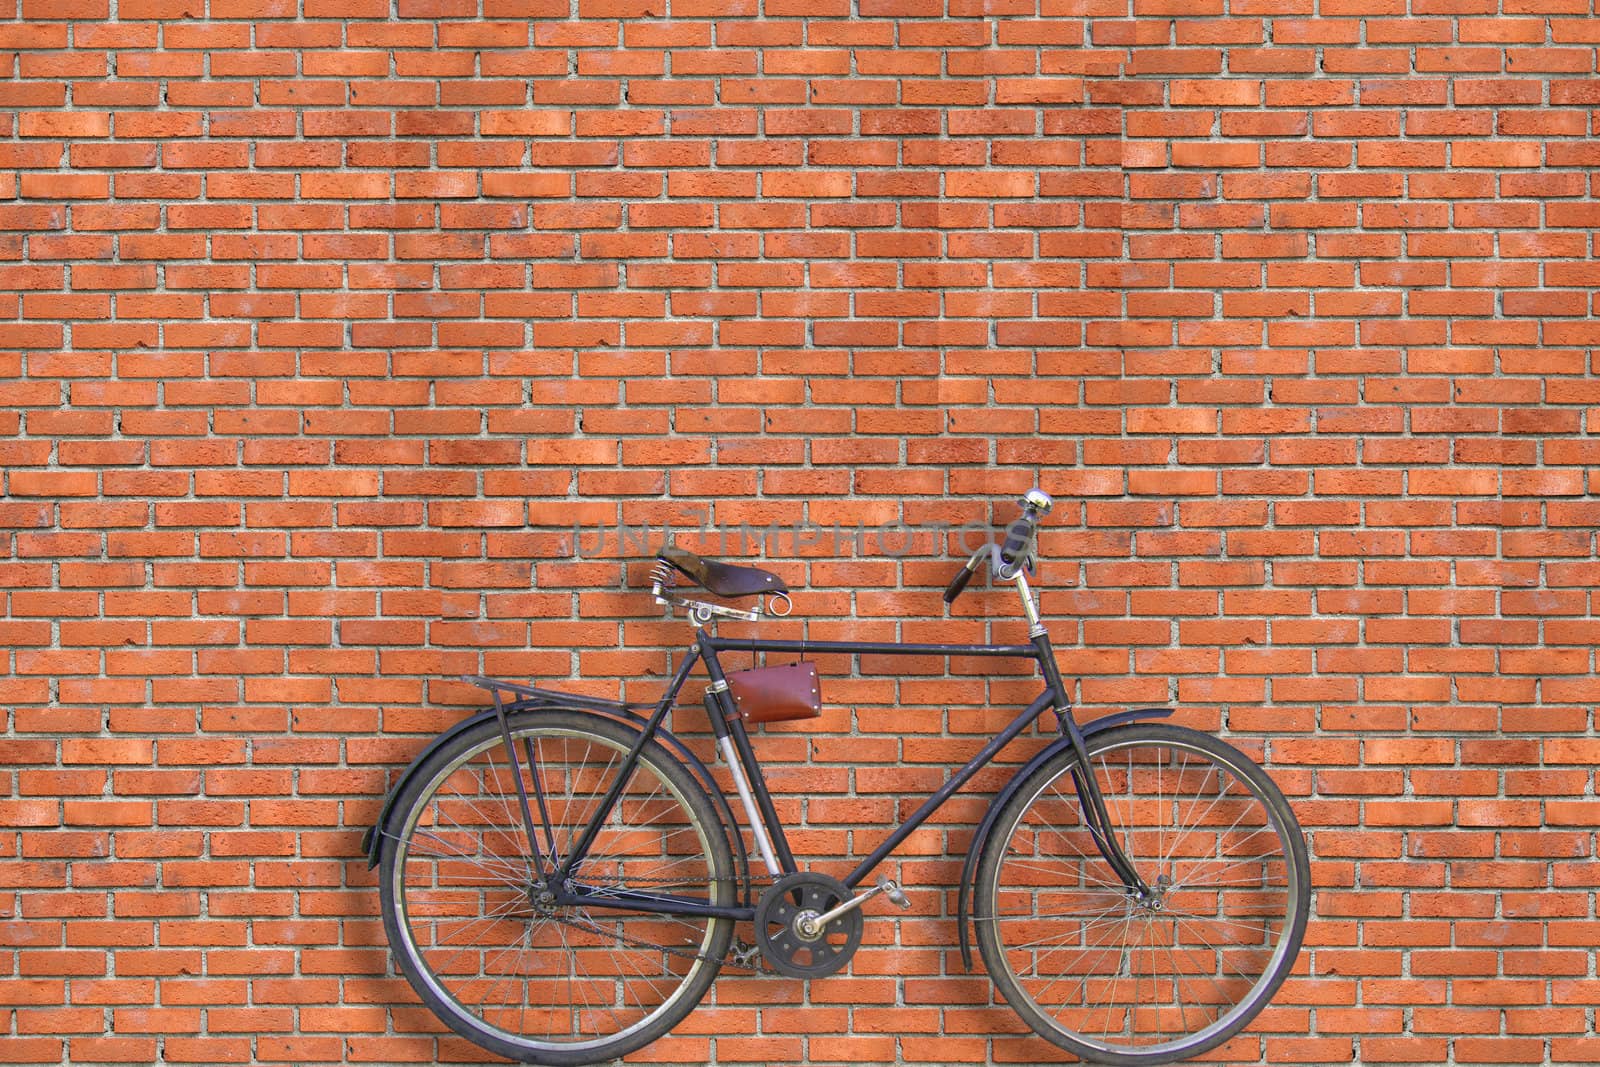 The bicycle stands near a wall from a red brick